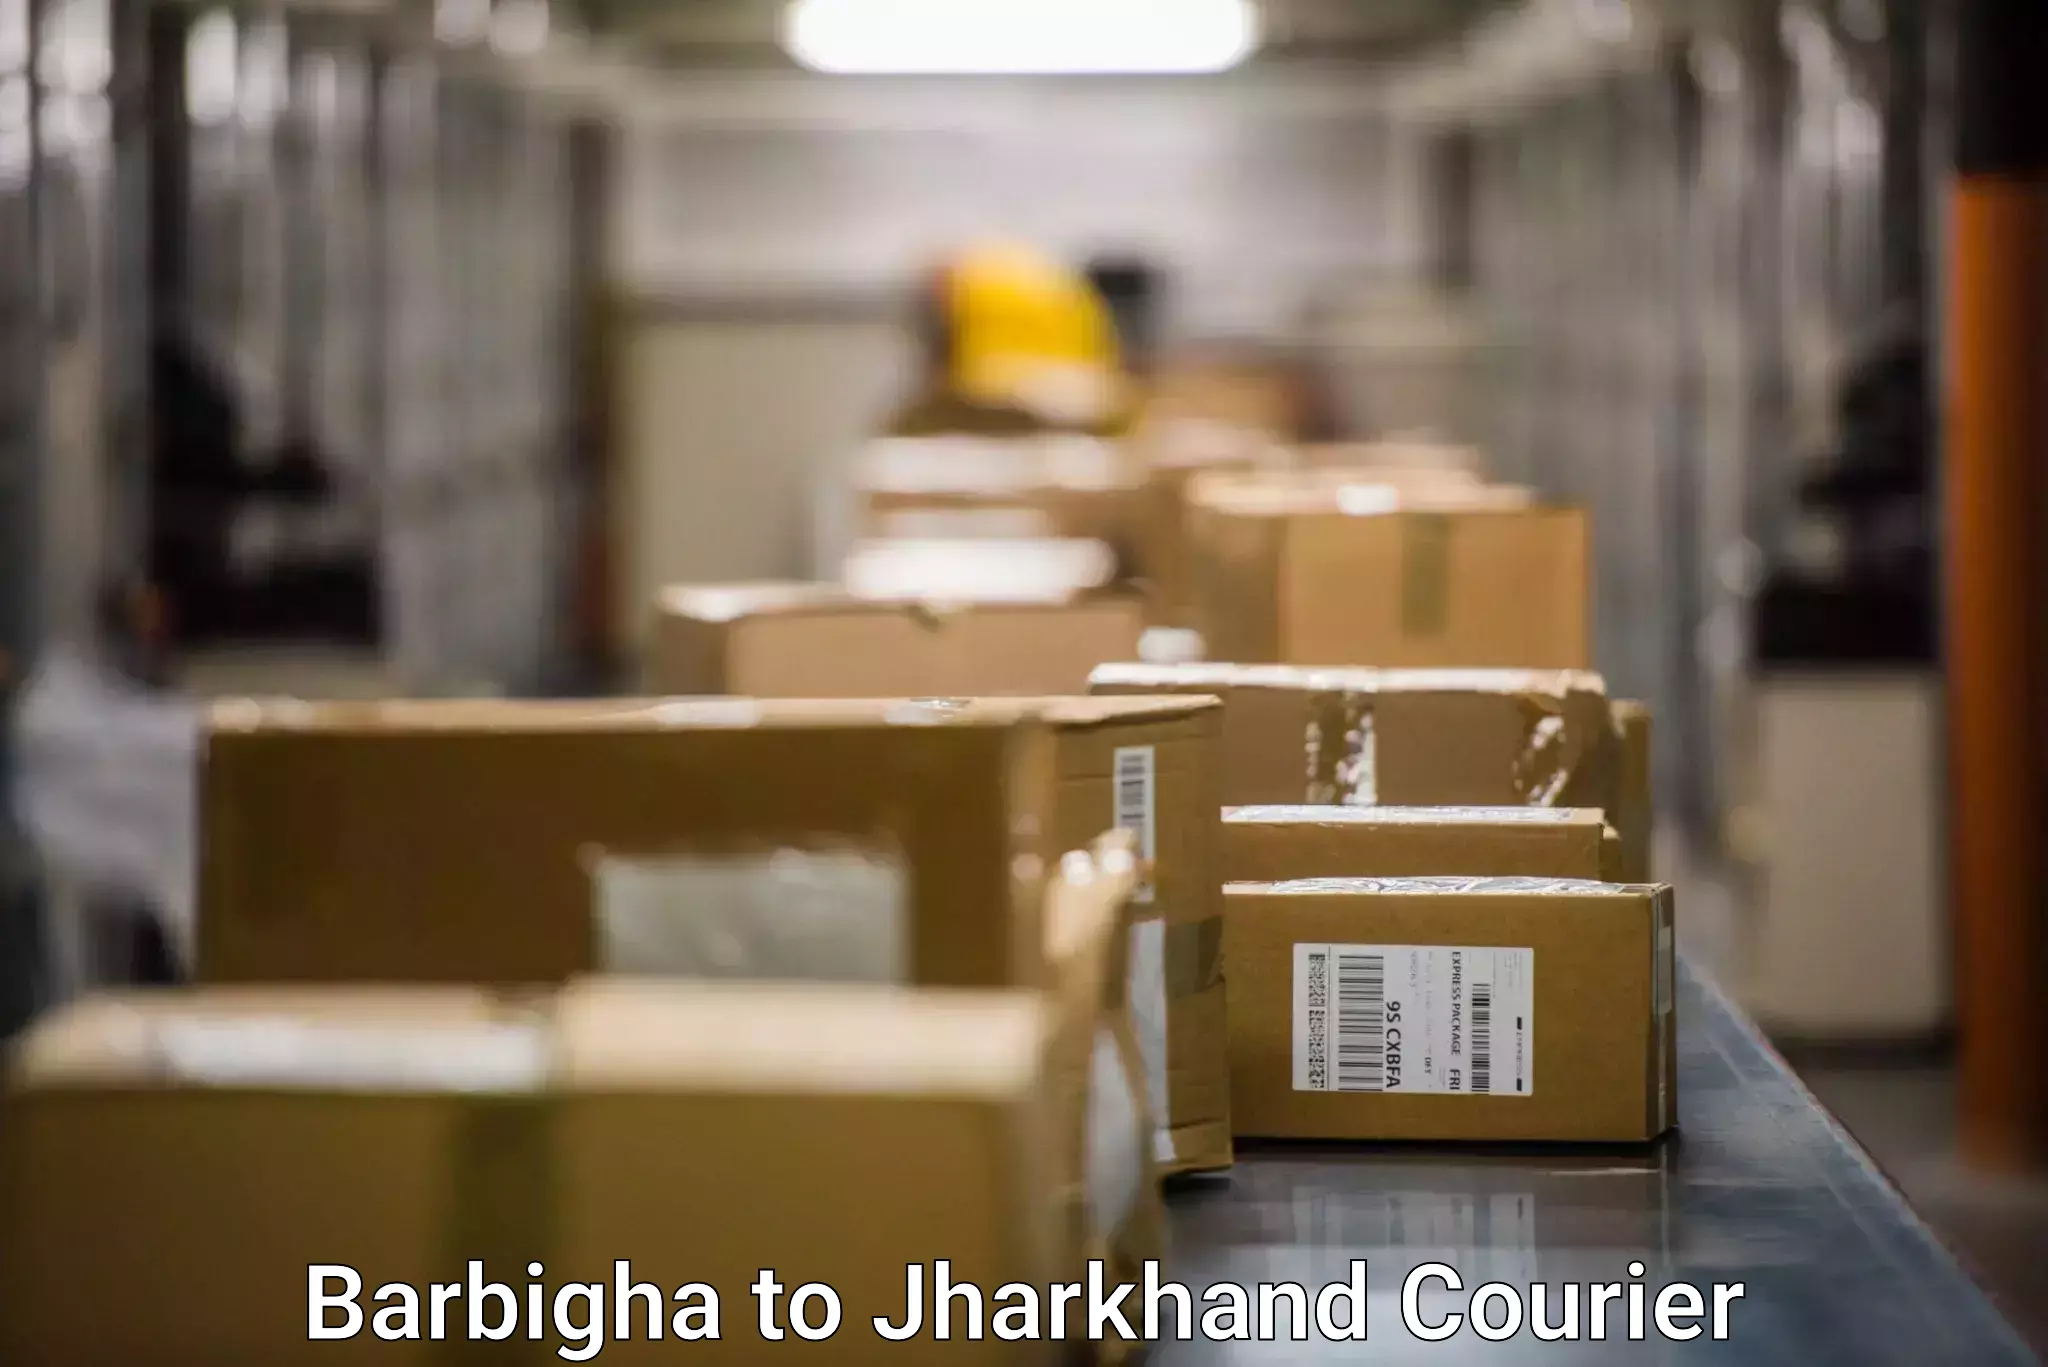 Secure package delivery in Barbigha to Dhanbad